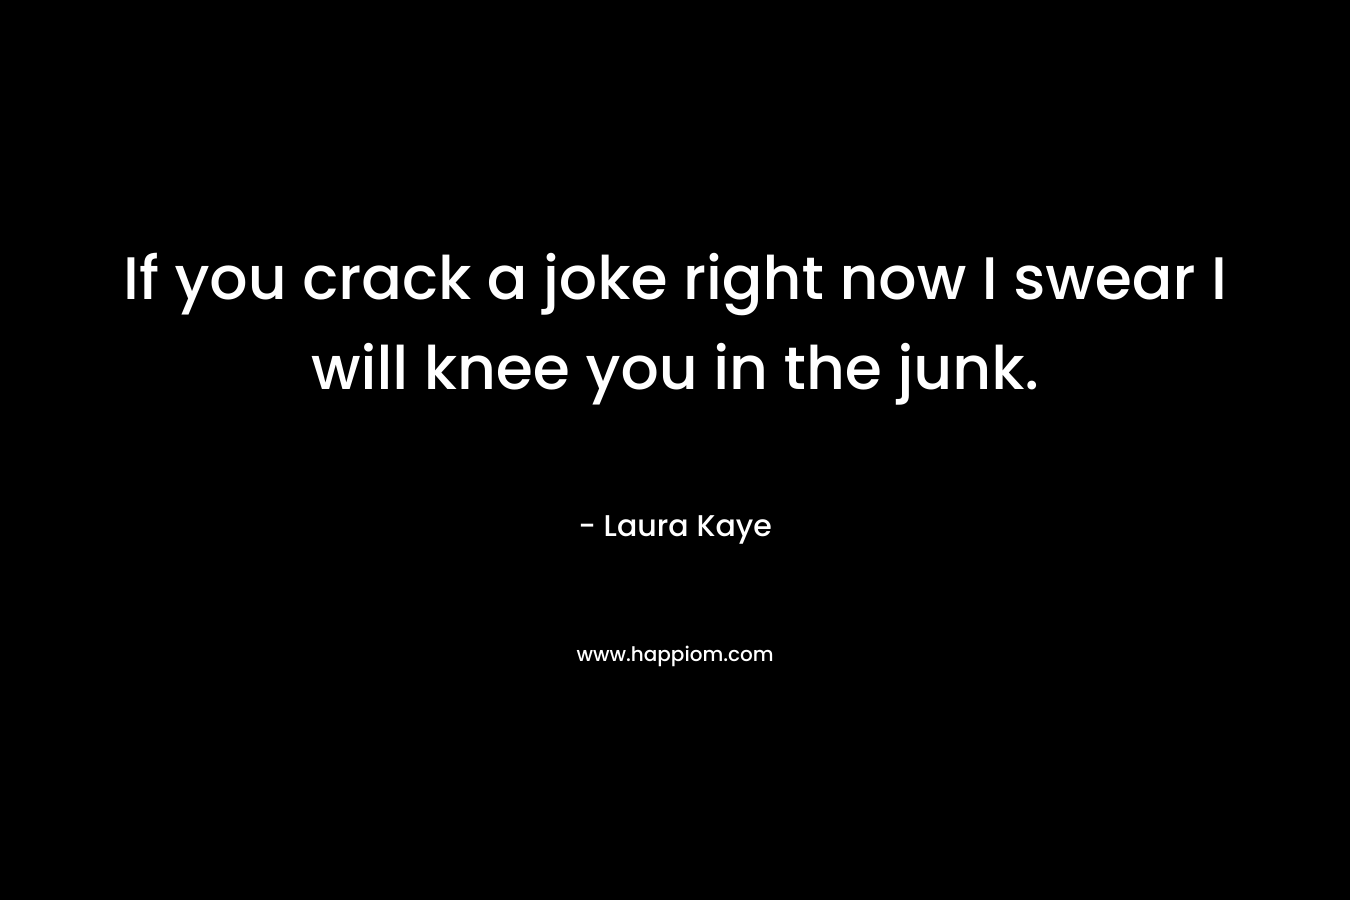 If you crack a joke right now I swear I will knee you in the junk. – Laura Kaye